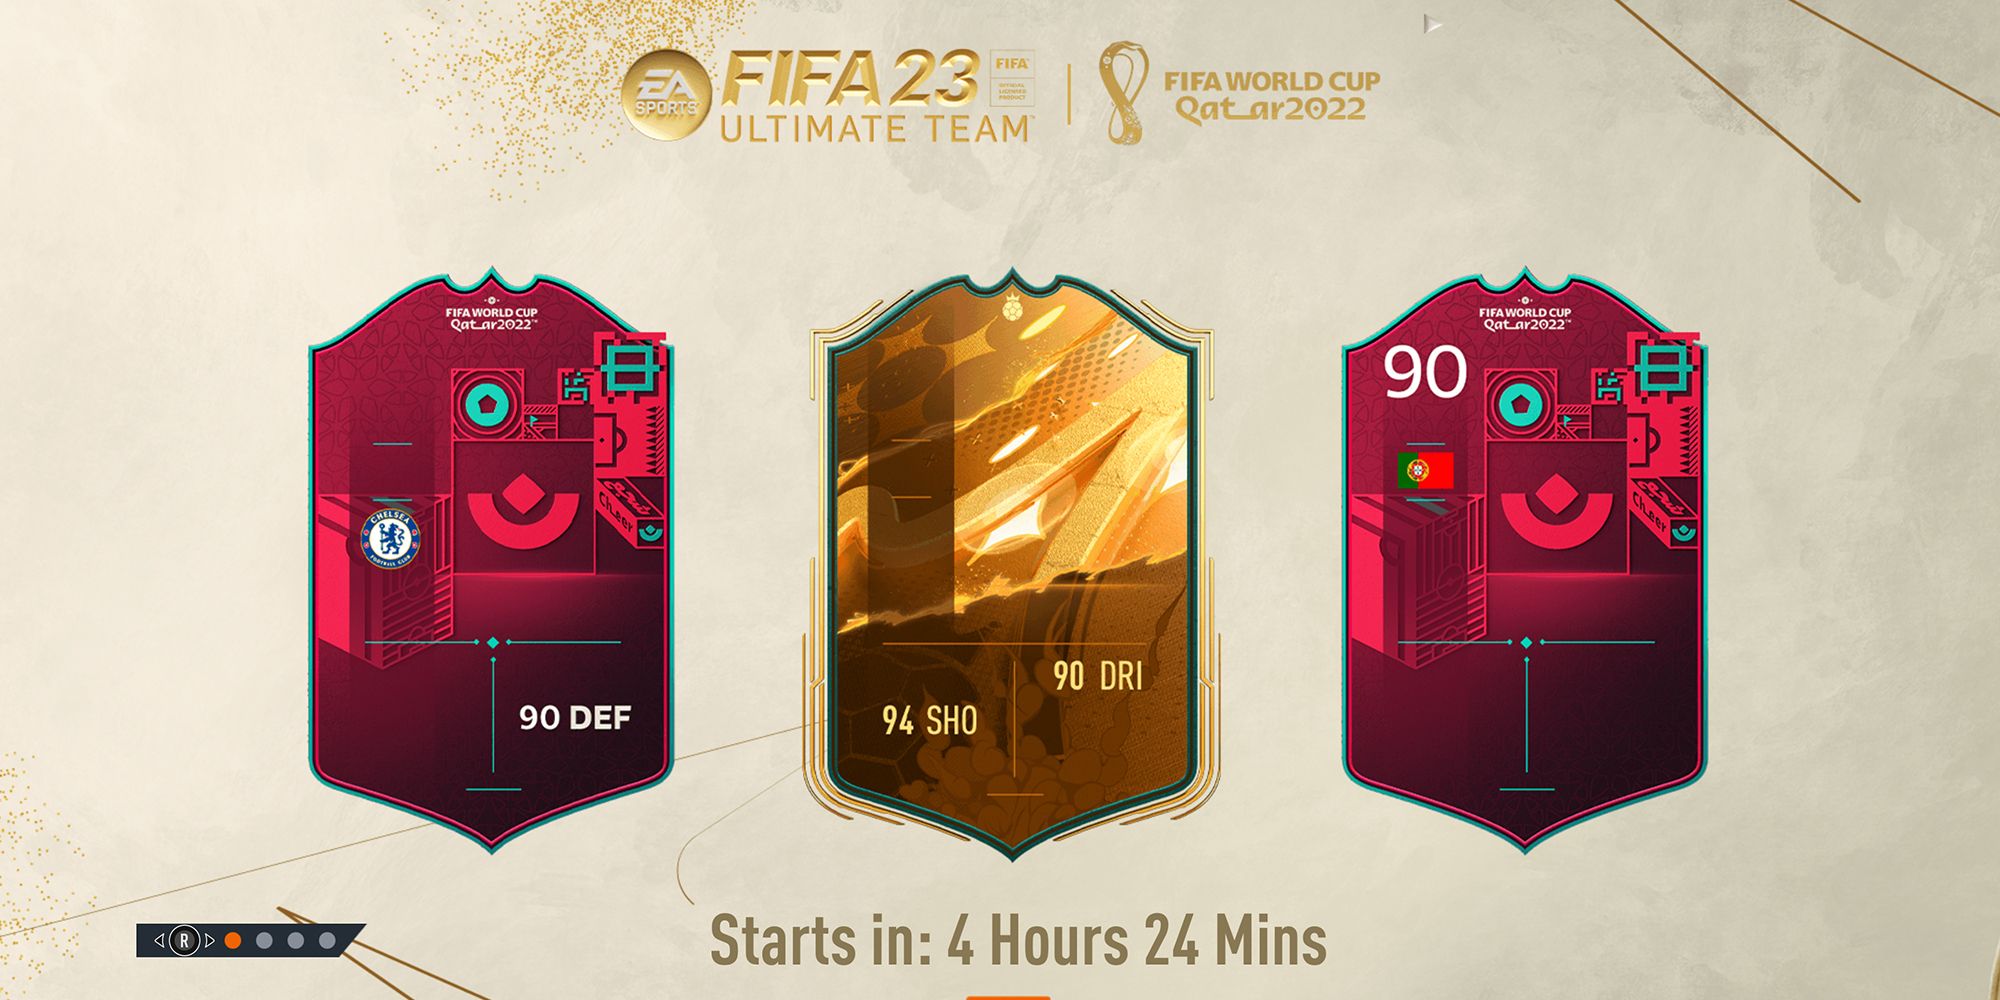 Screenshot Of Upcoming Ultimate Team Cards In FIFA 23 World Cup Mode